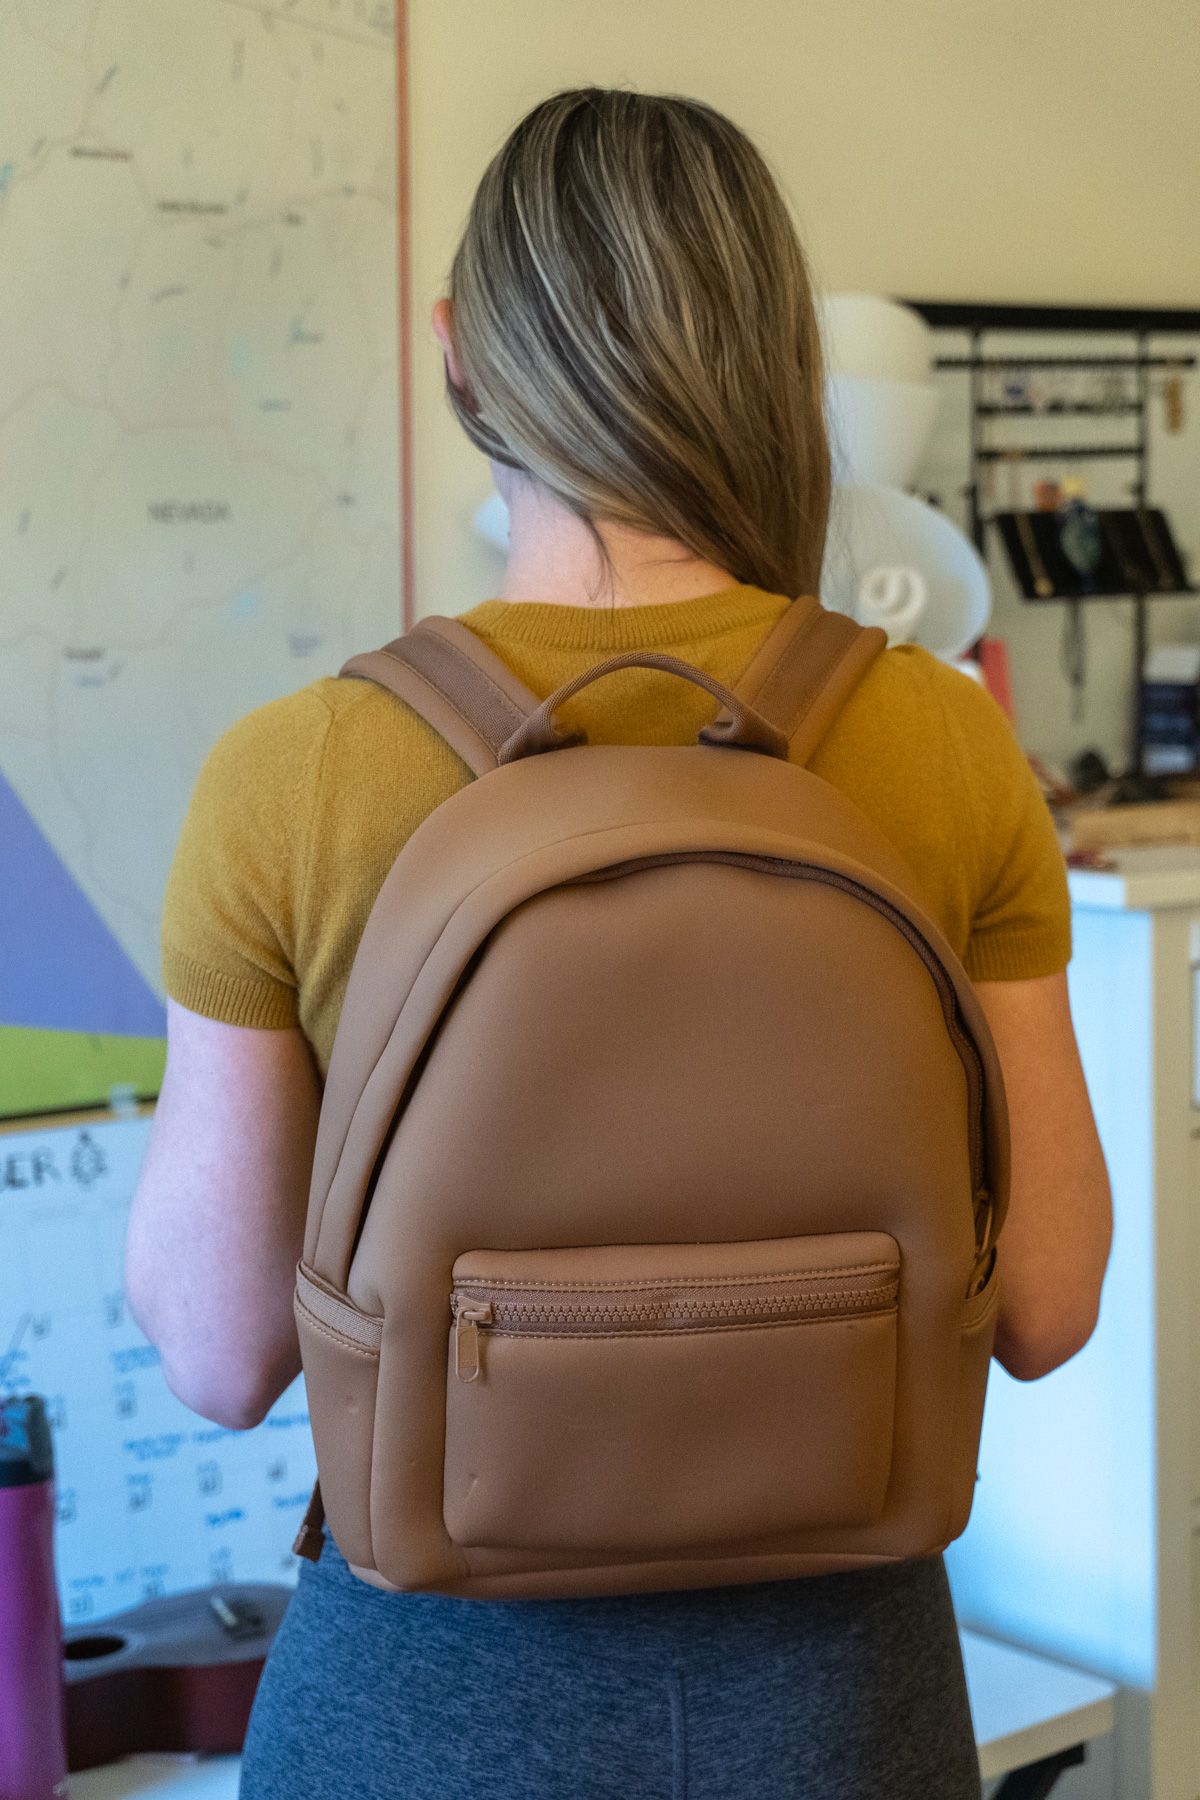 A young woman wearing a brown Neoprene Backpack, grey Ultra-Soft High-Rise Leggings and a yellow shirt stands with her back to the camera in an interior setting.